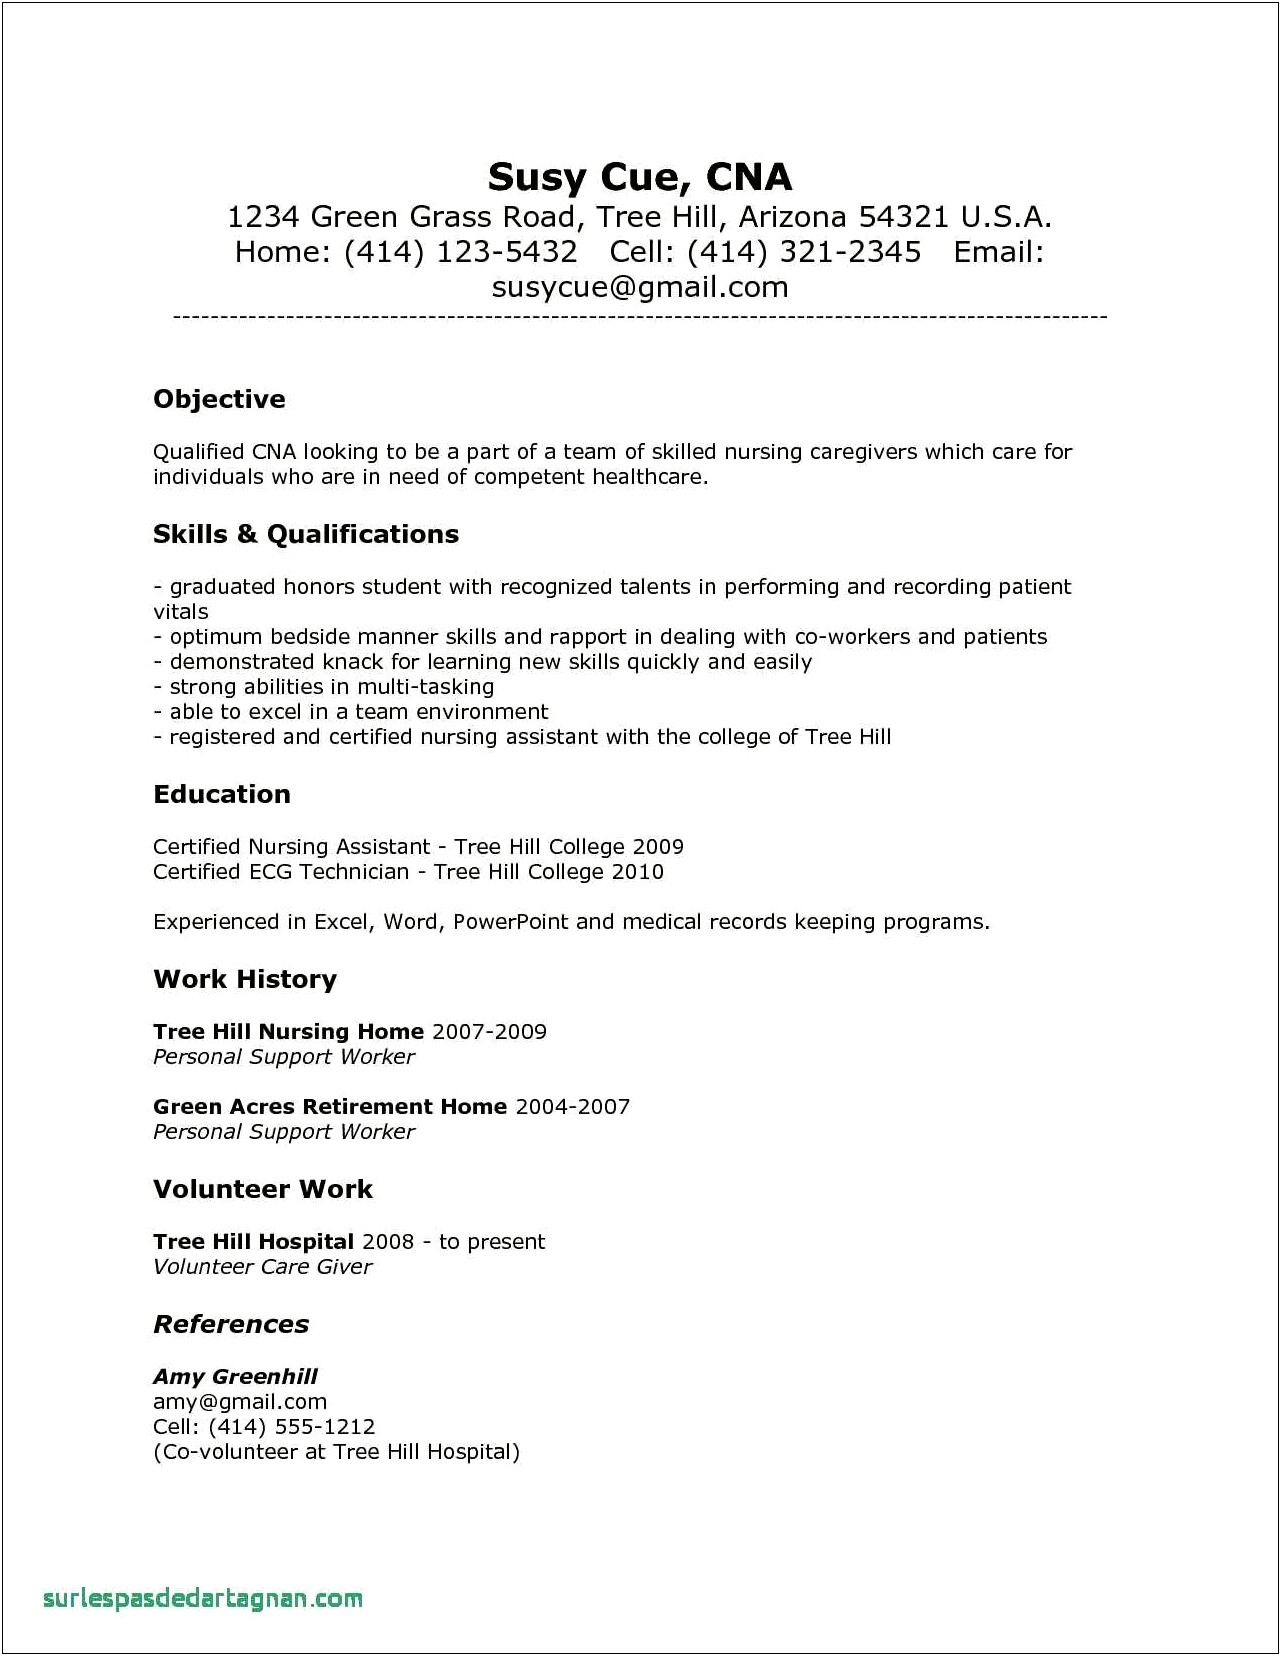 Objective For Resume To Get Into Nursing School